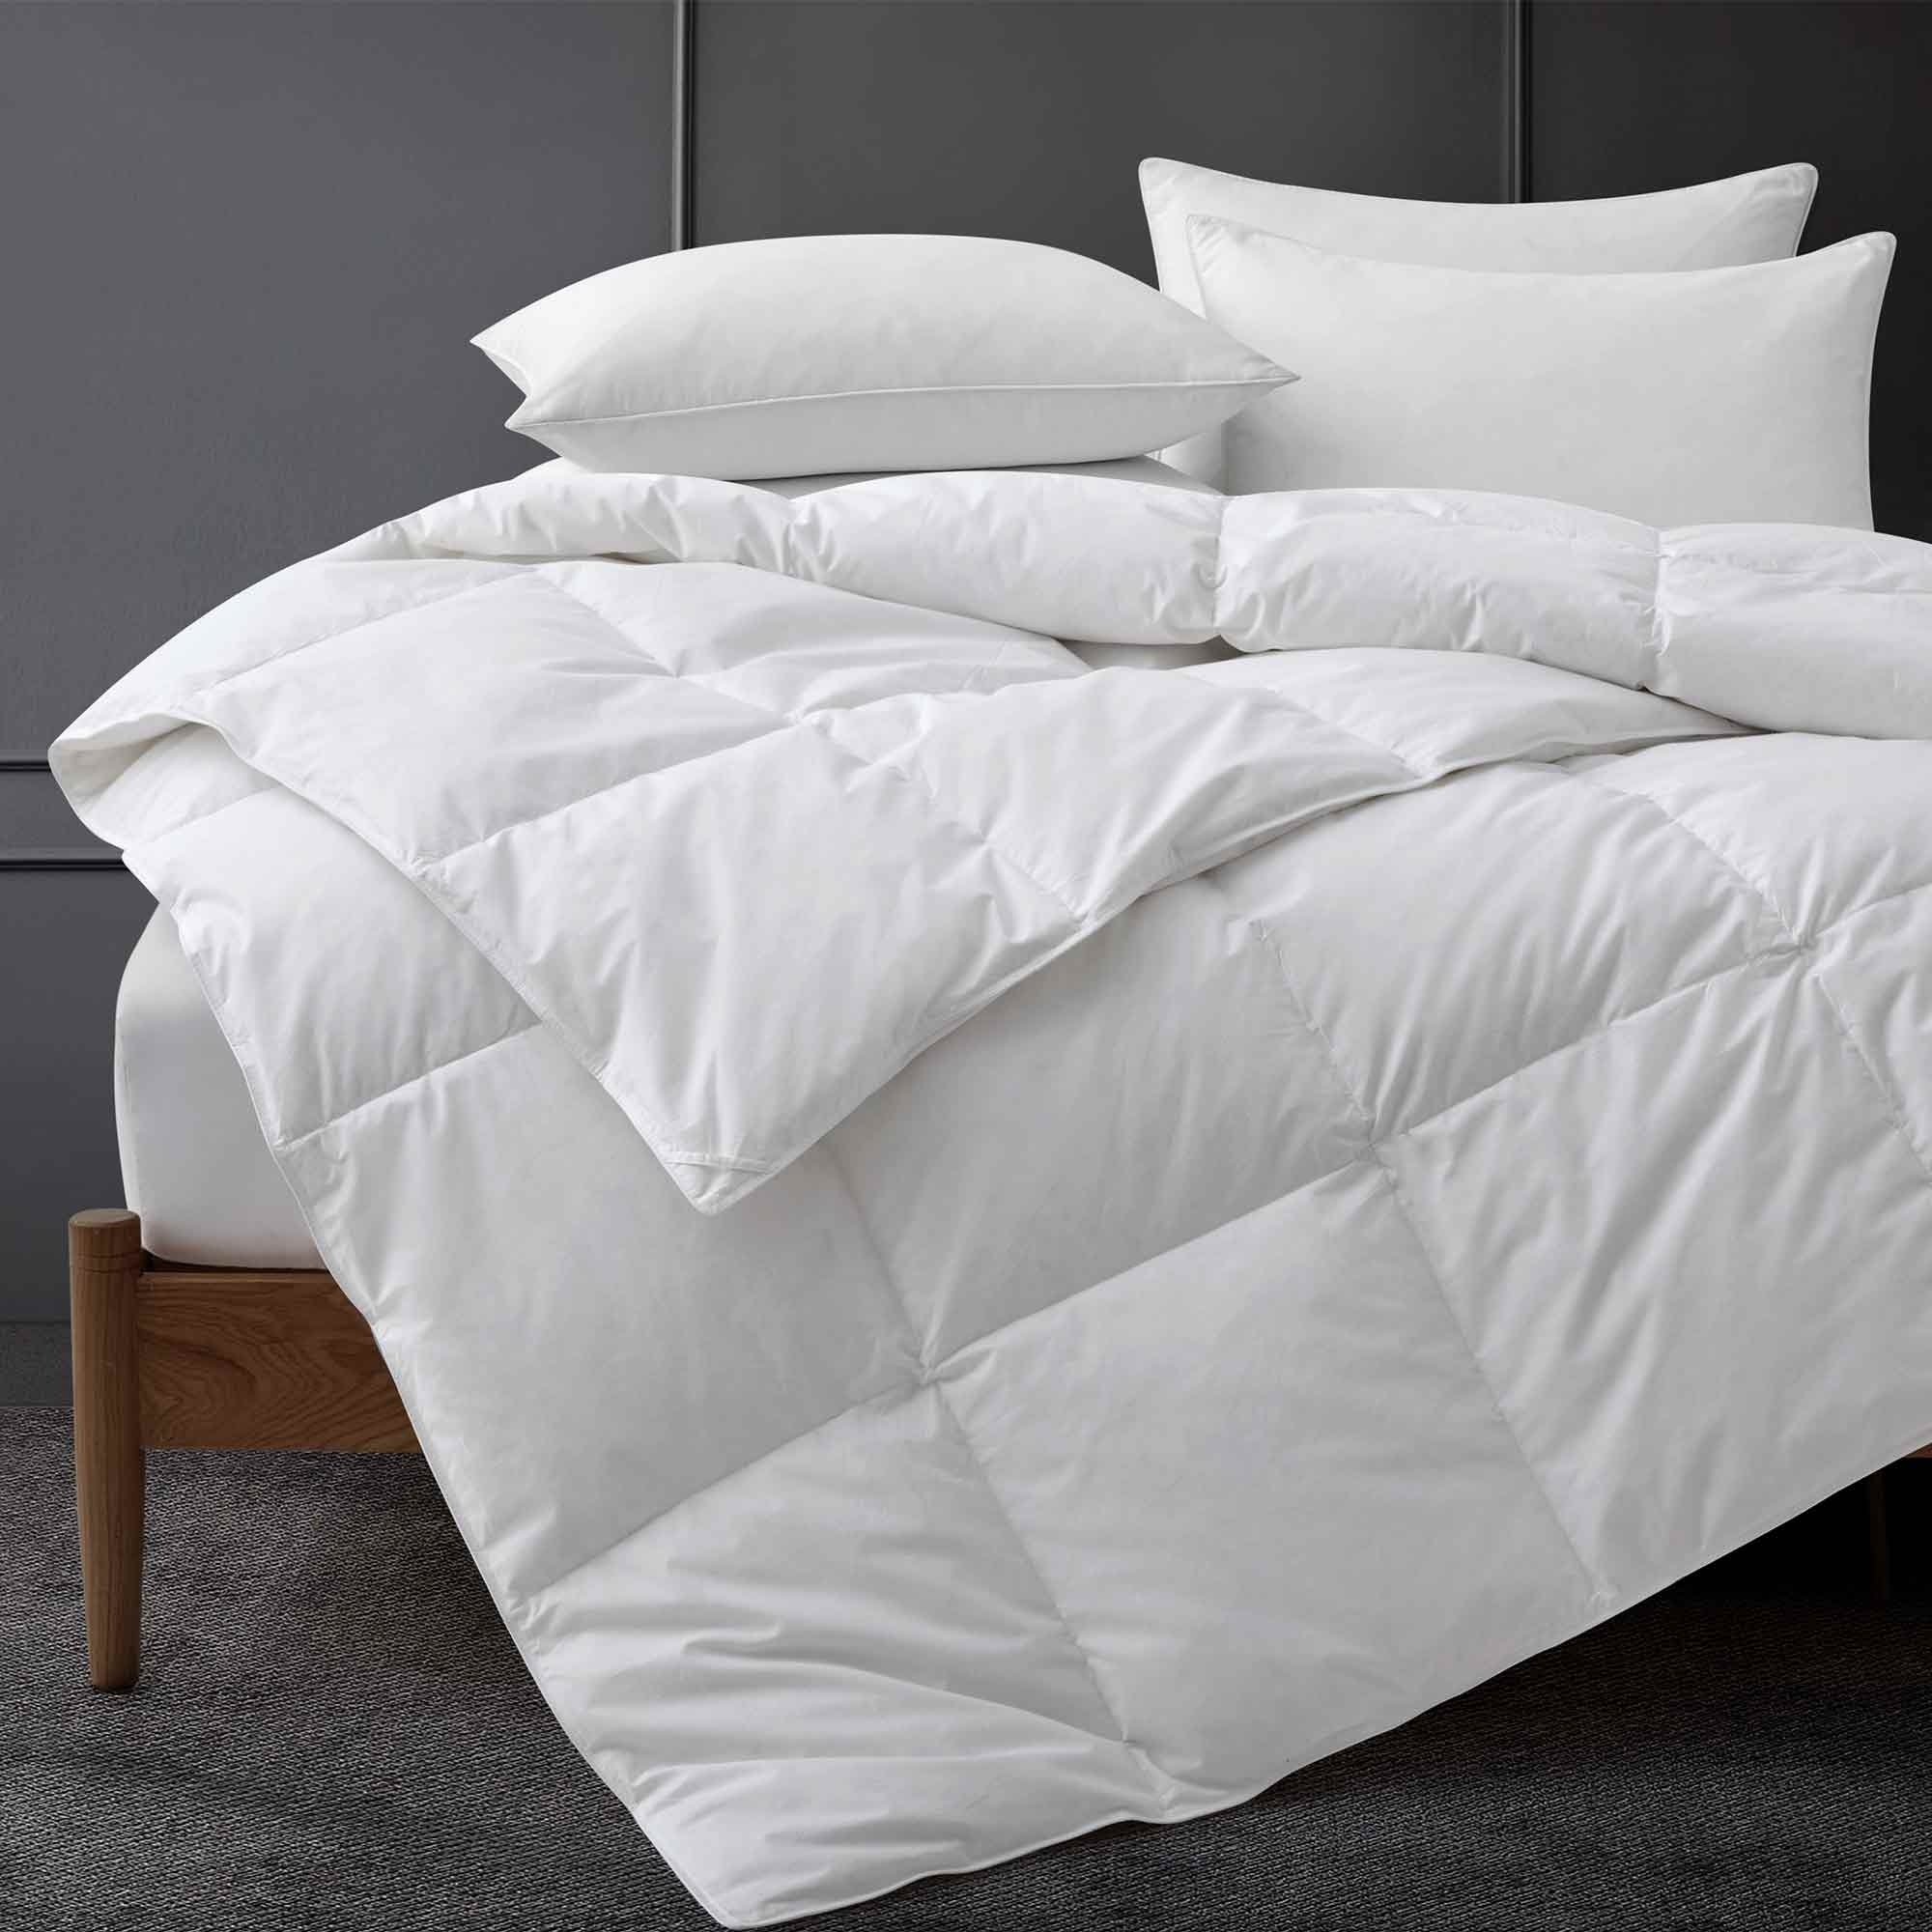 White Goose Feather And Down Comforters, Lightweight And Medium Weight Duvet Insert - Lightweight, King